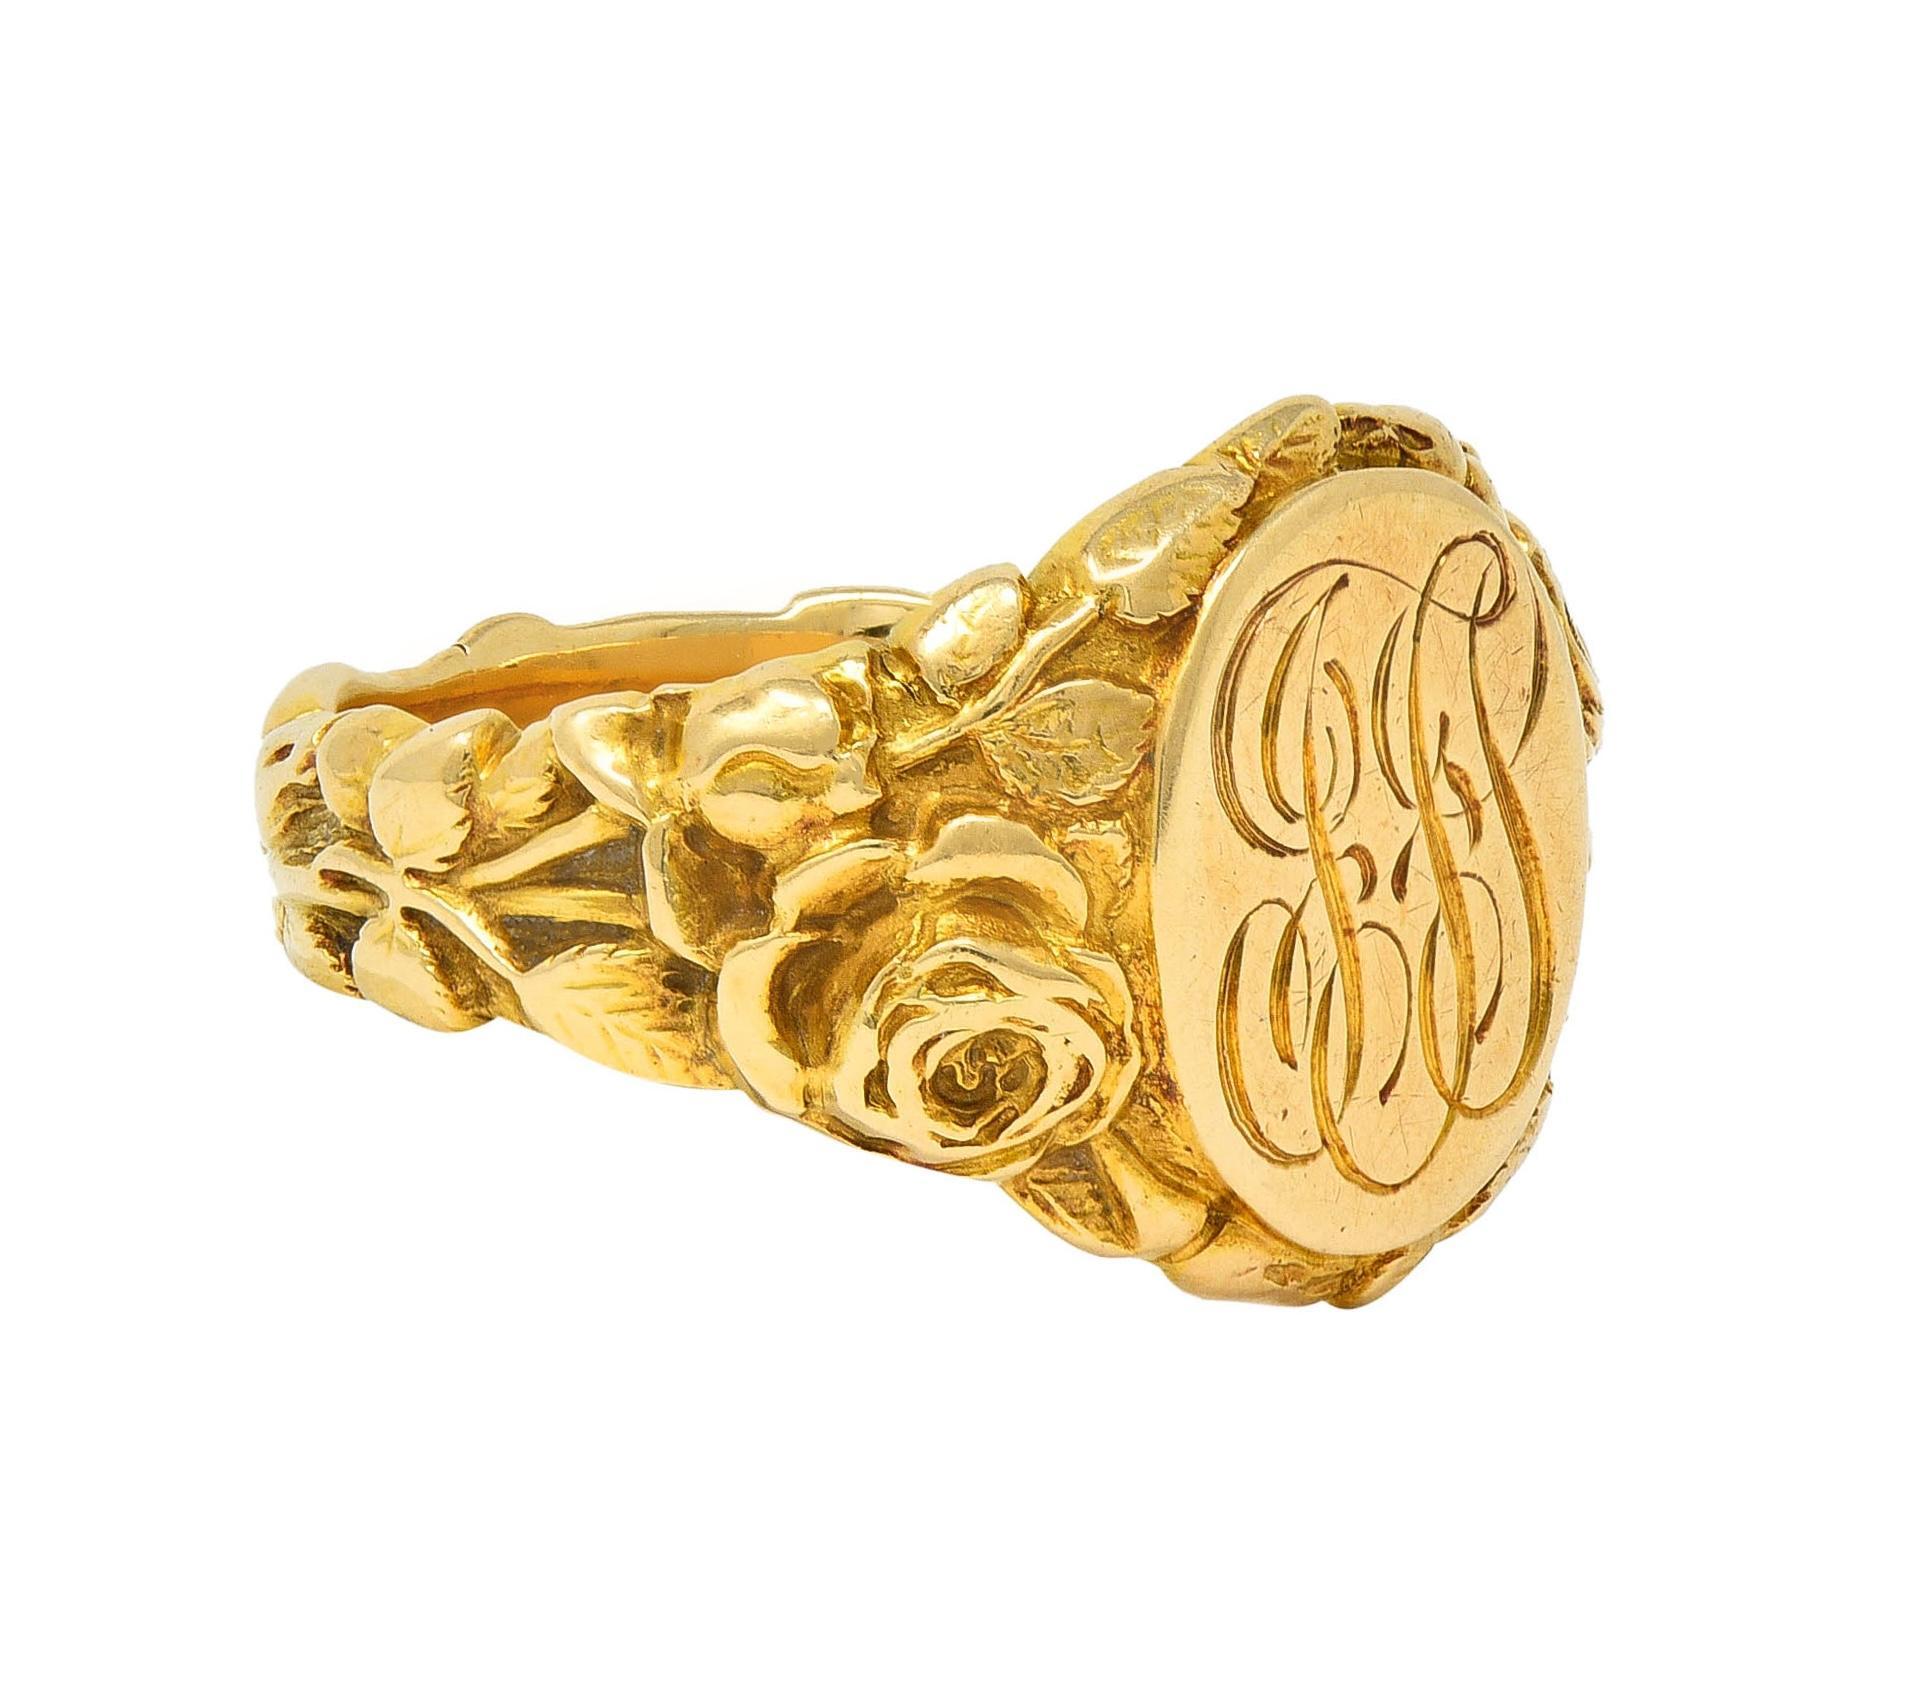 Centering an oval-shaped signet face centering an engraved monogram of the initials 'JFS'
With a bombé shaped surround highly rendered with grooved roses
Depicting blooms, buds, stems, and foliates fully around
Inscribed 'June 25 '03'
Stamped for 14